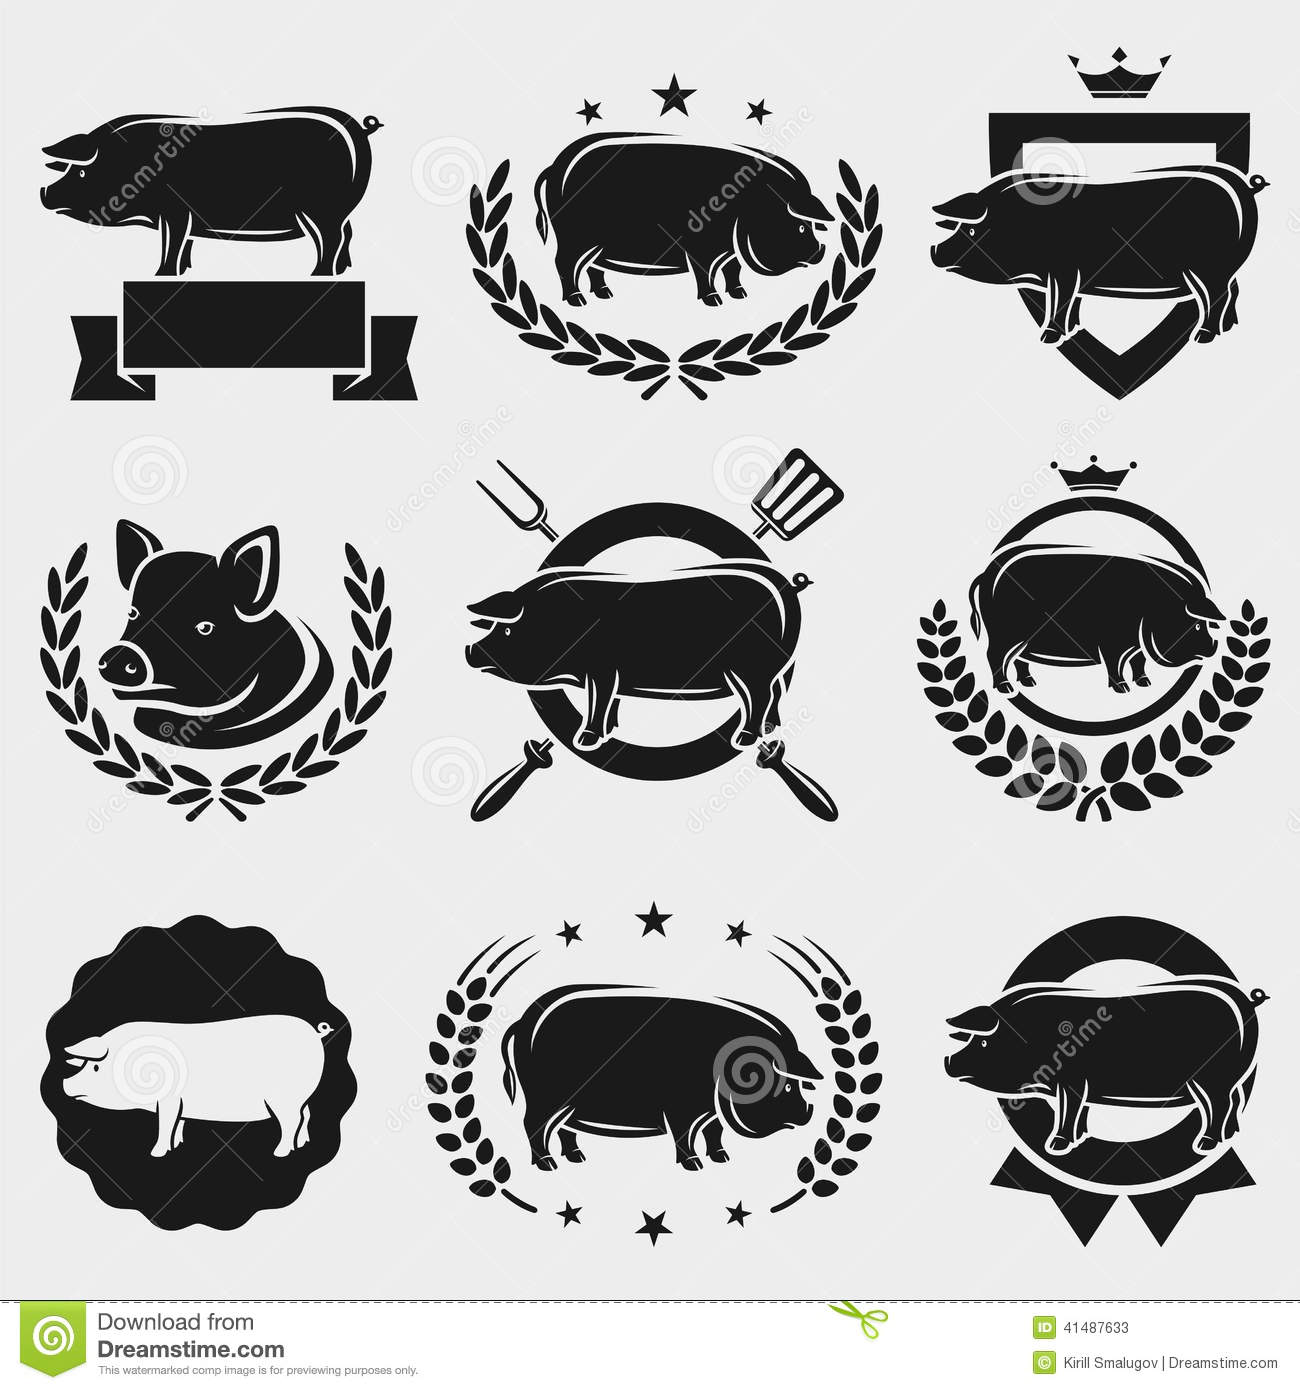 Pig Silhouette Vector